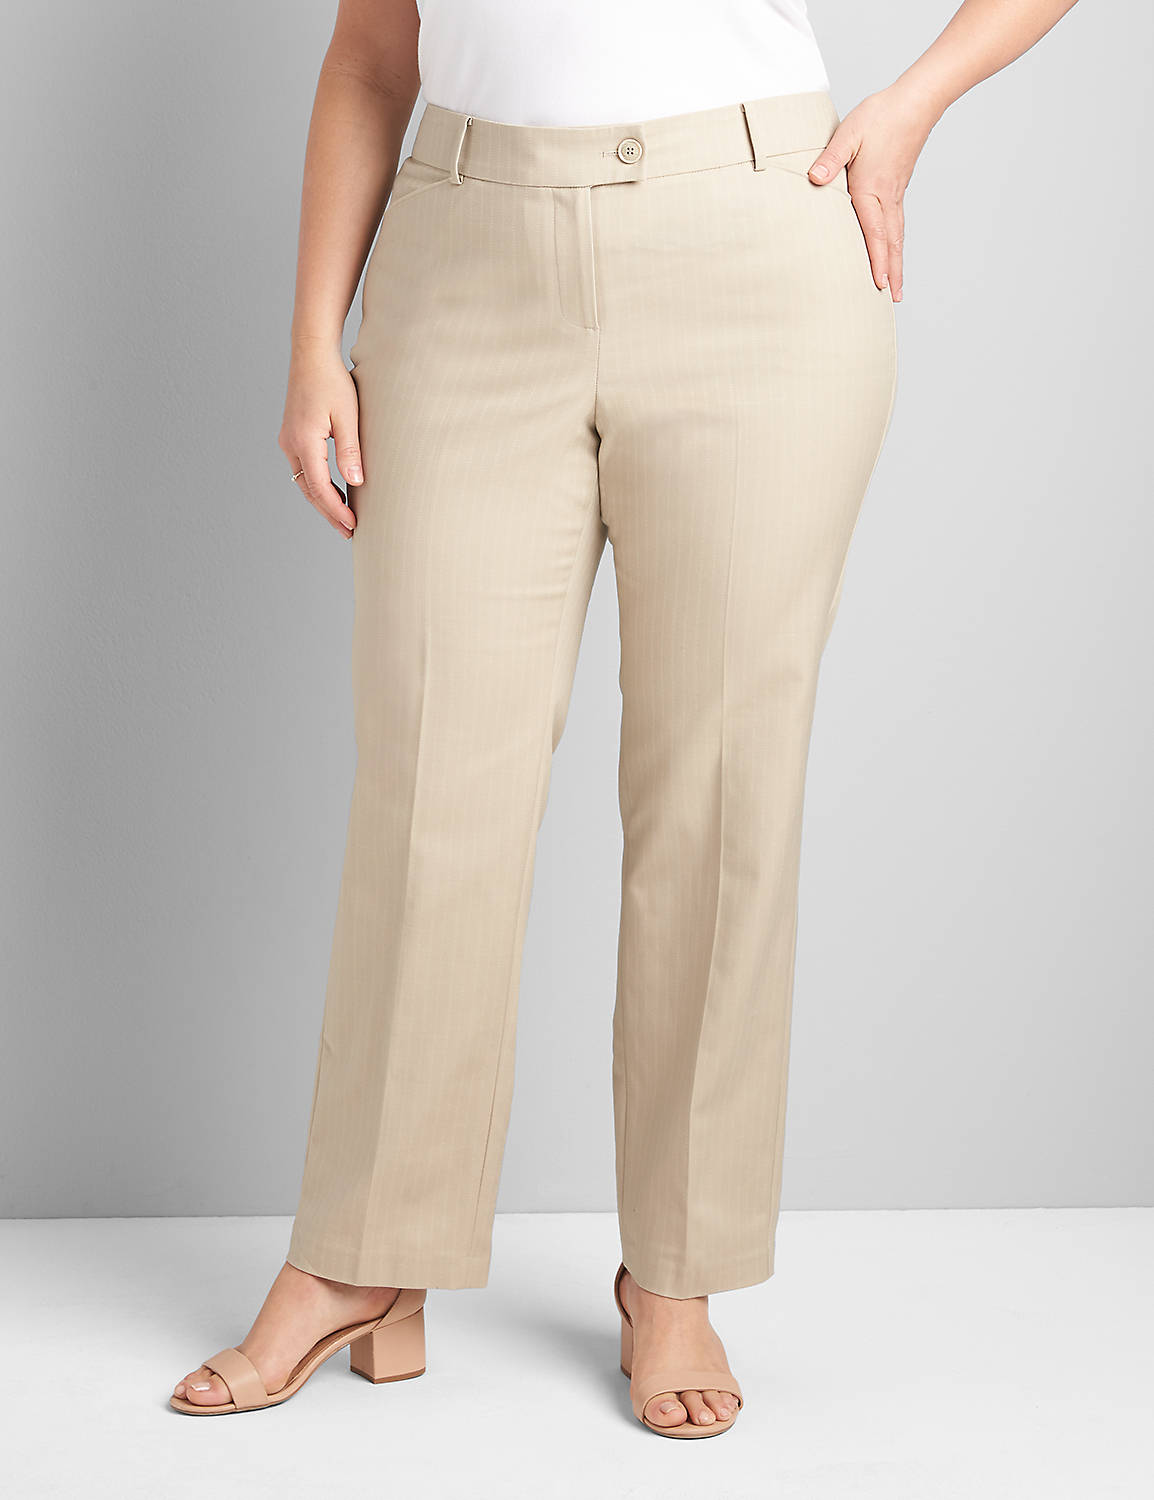 Signature Fit Straight Pant Product Image 1